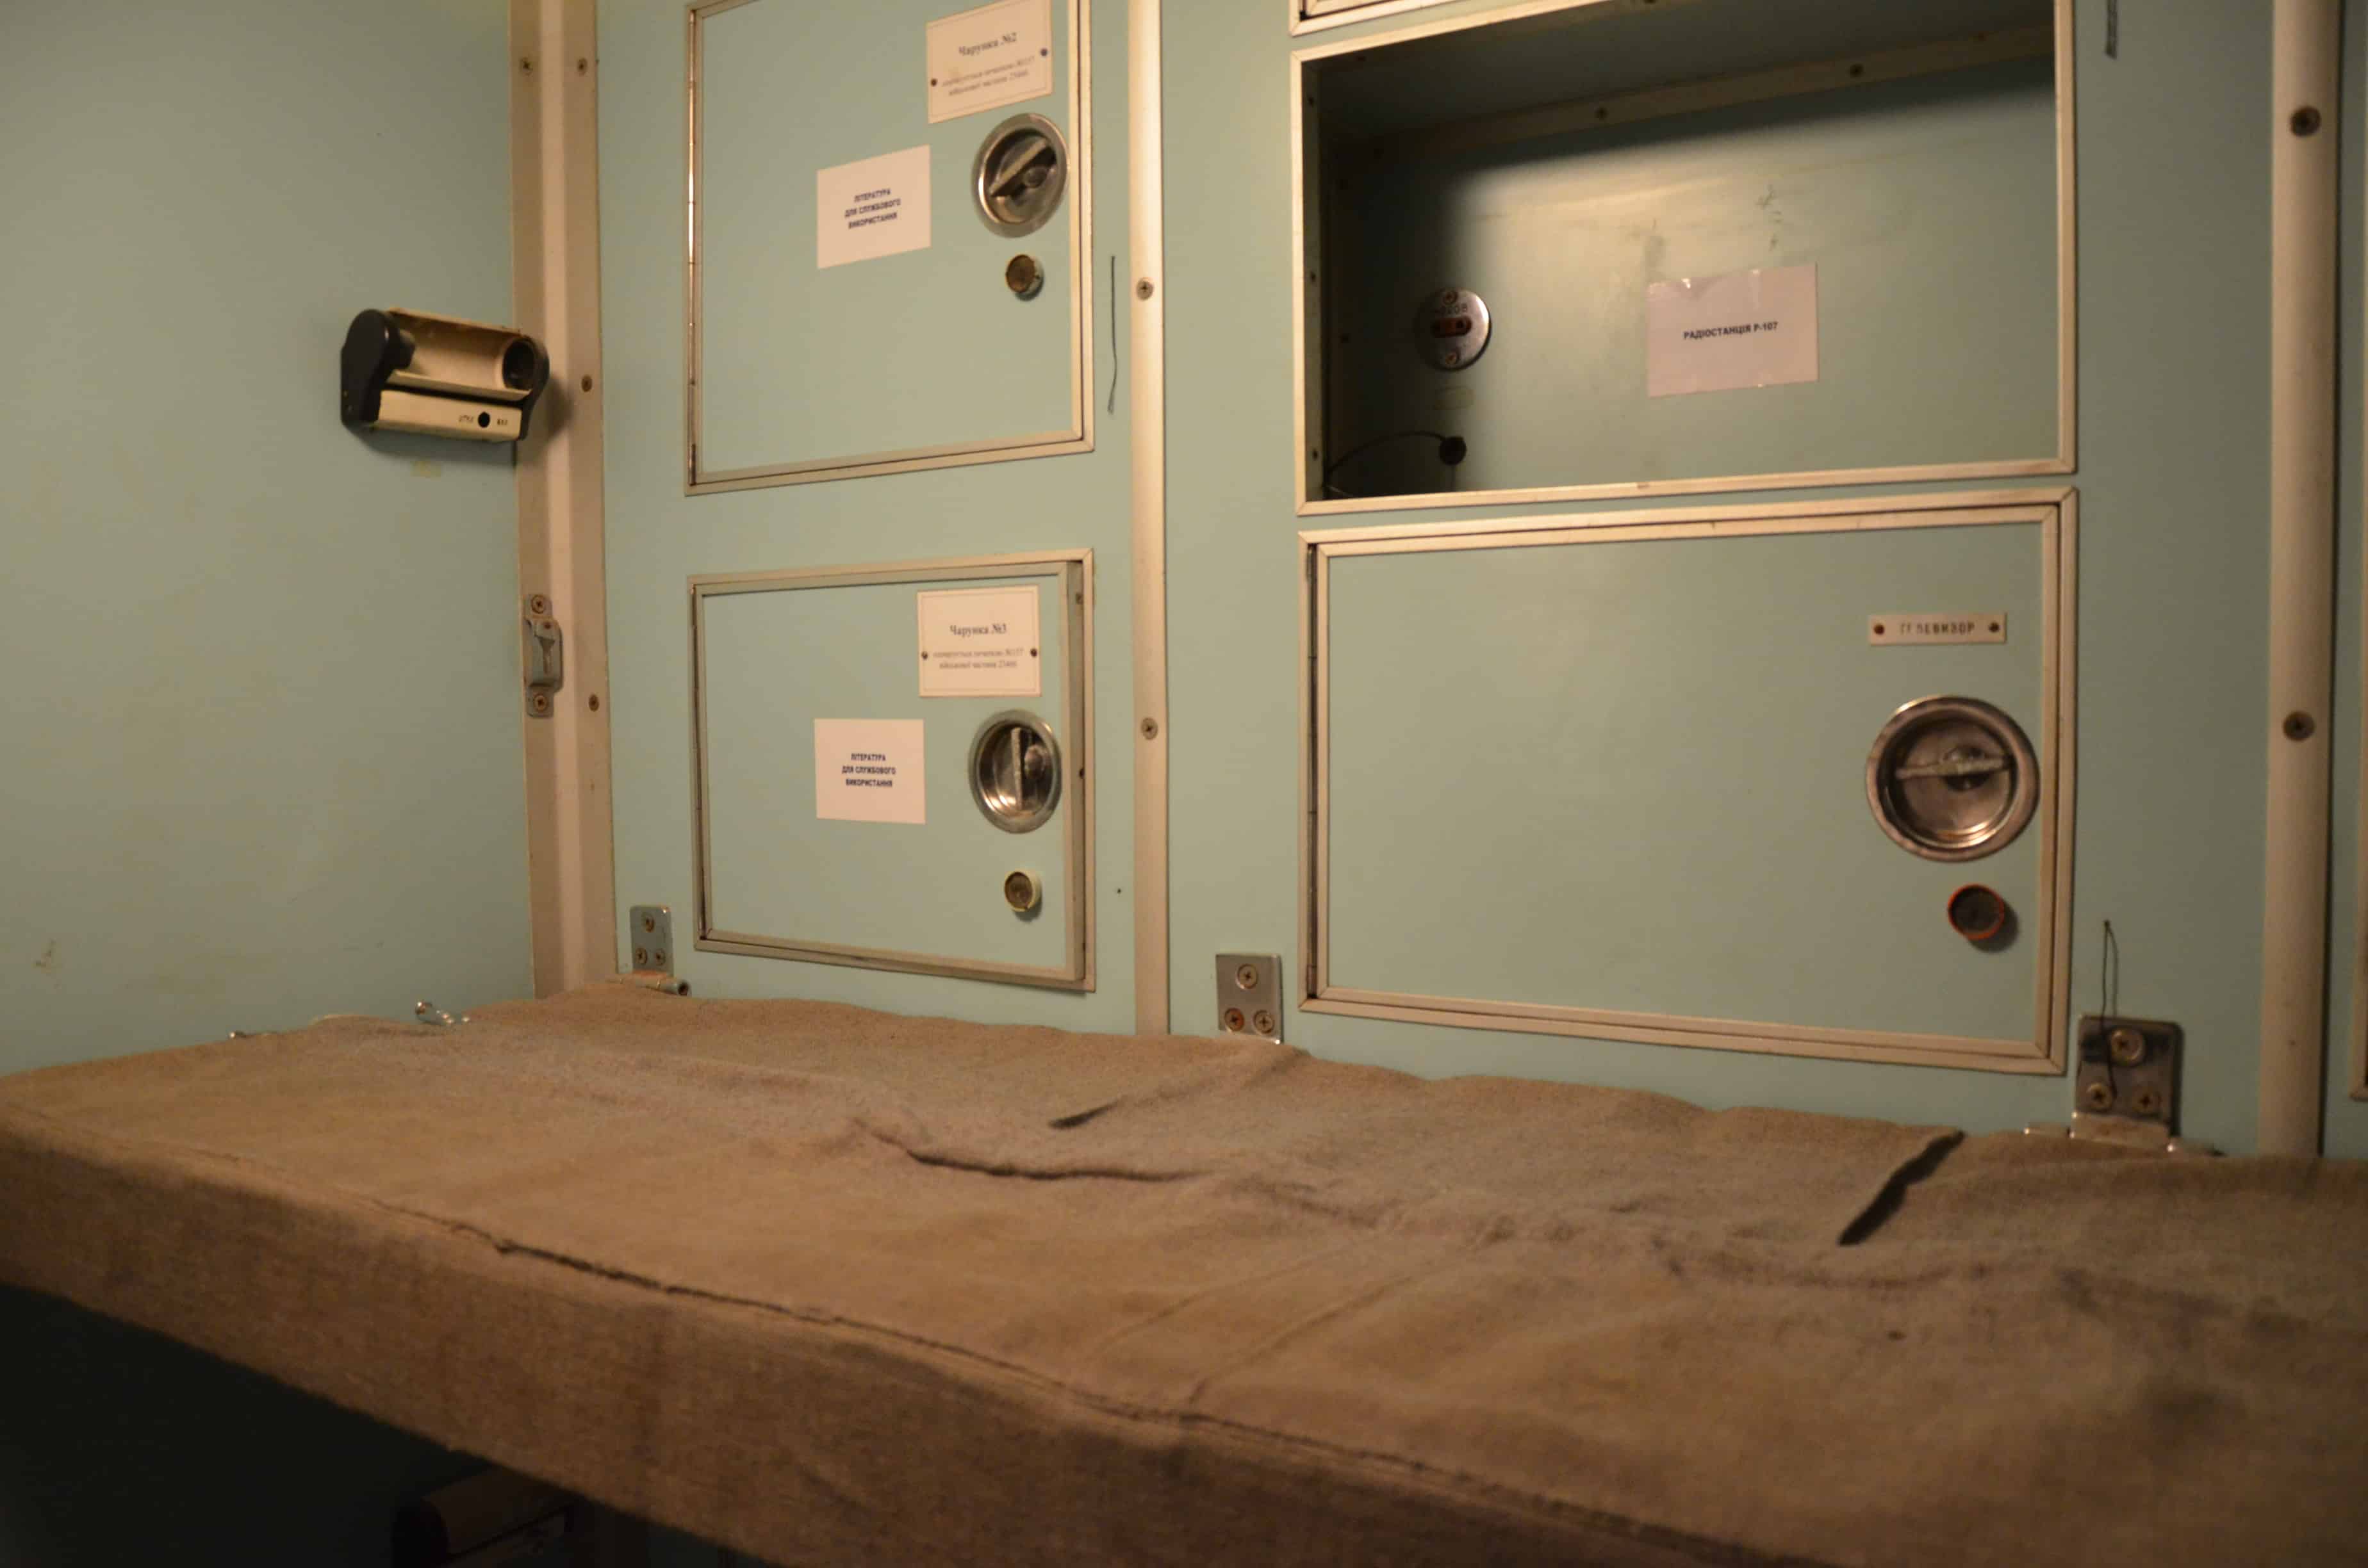 Living quarters in the Unified Command Post at Strategic Missile Forces Museum near Pobuzke, Ukraine